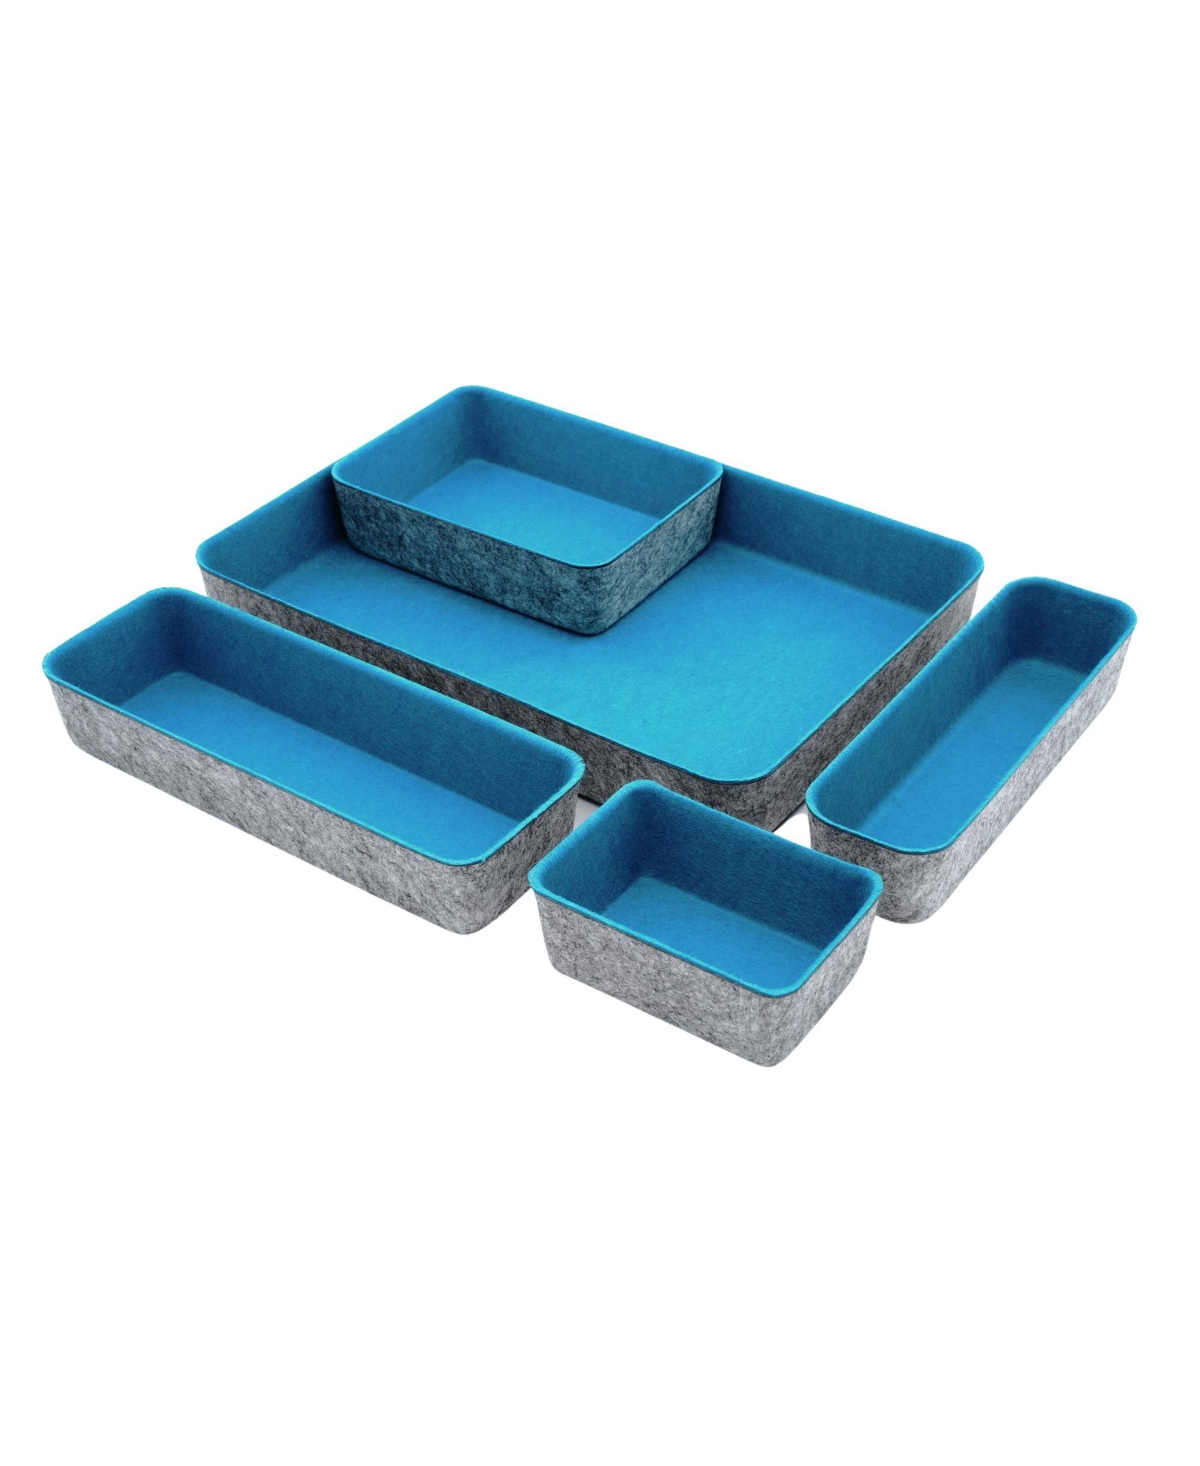 Shop Welaxy Felt 5 Piece Desk And Drawer Organizer Tray Set In Turquoise